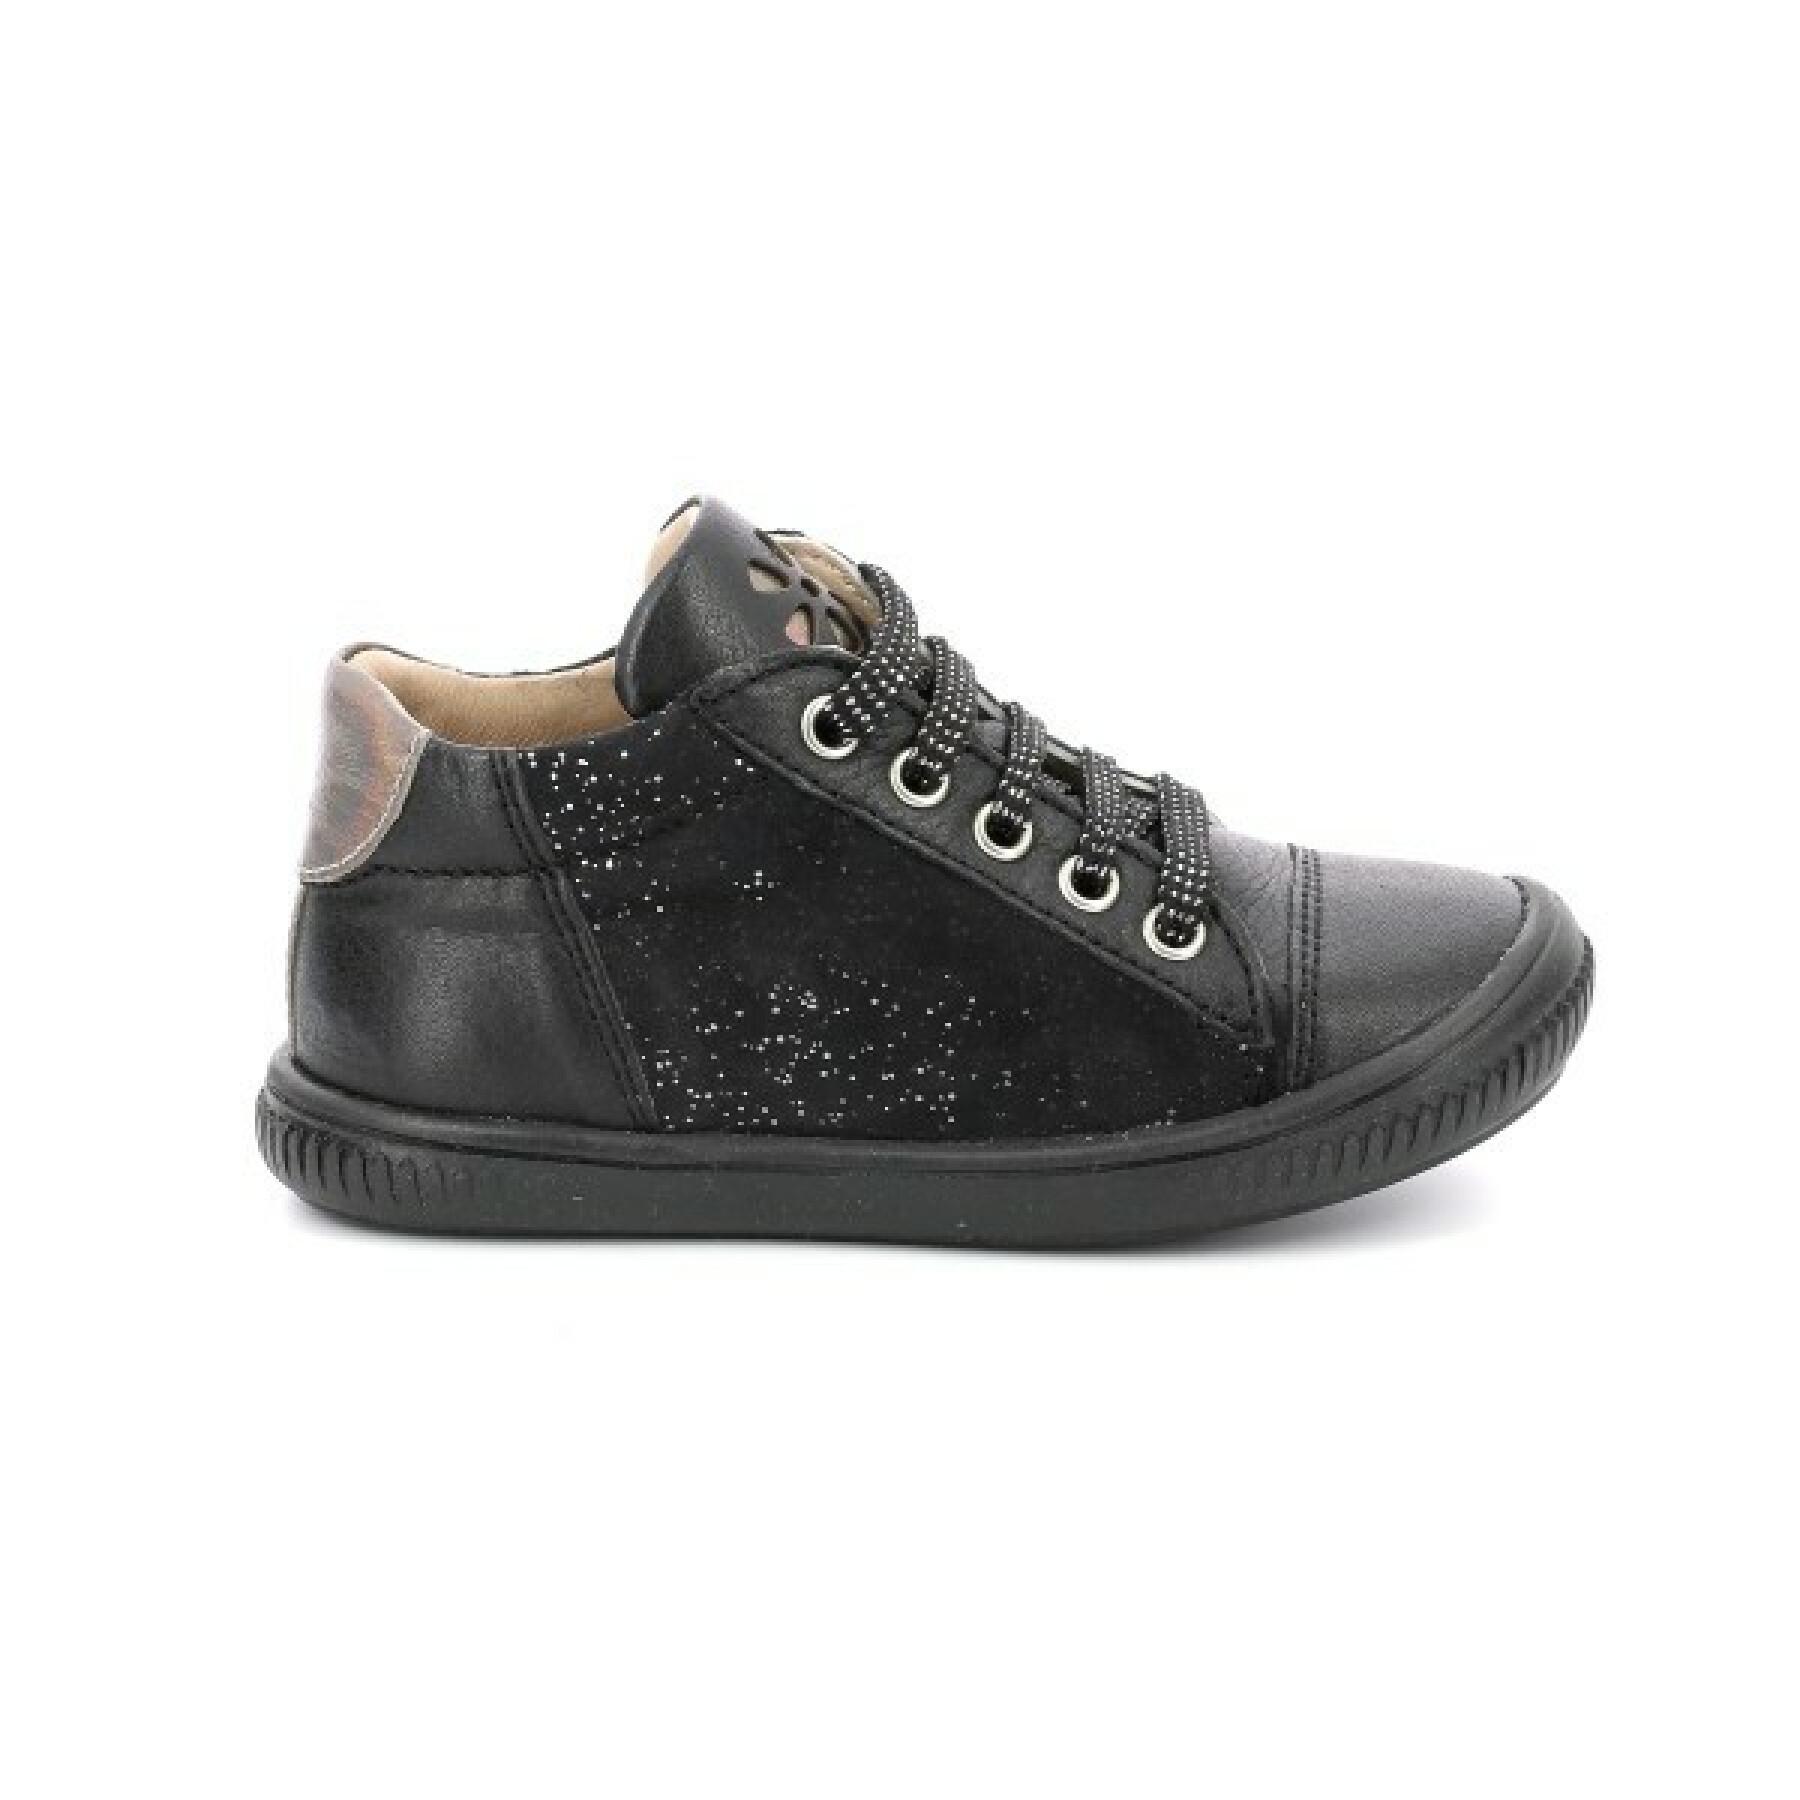 Children's sneakers Aster fratero